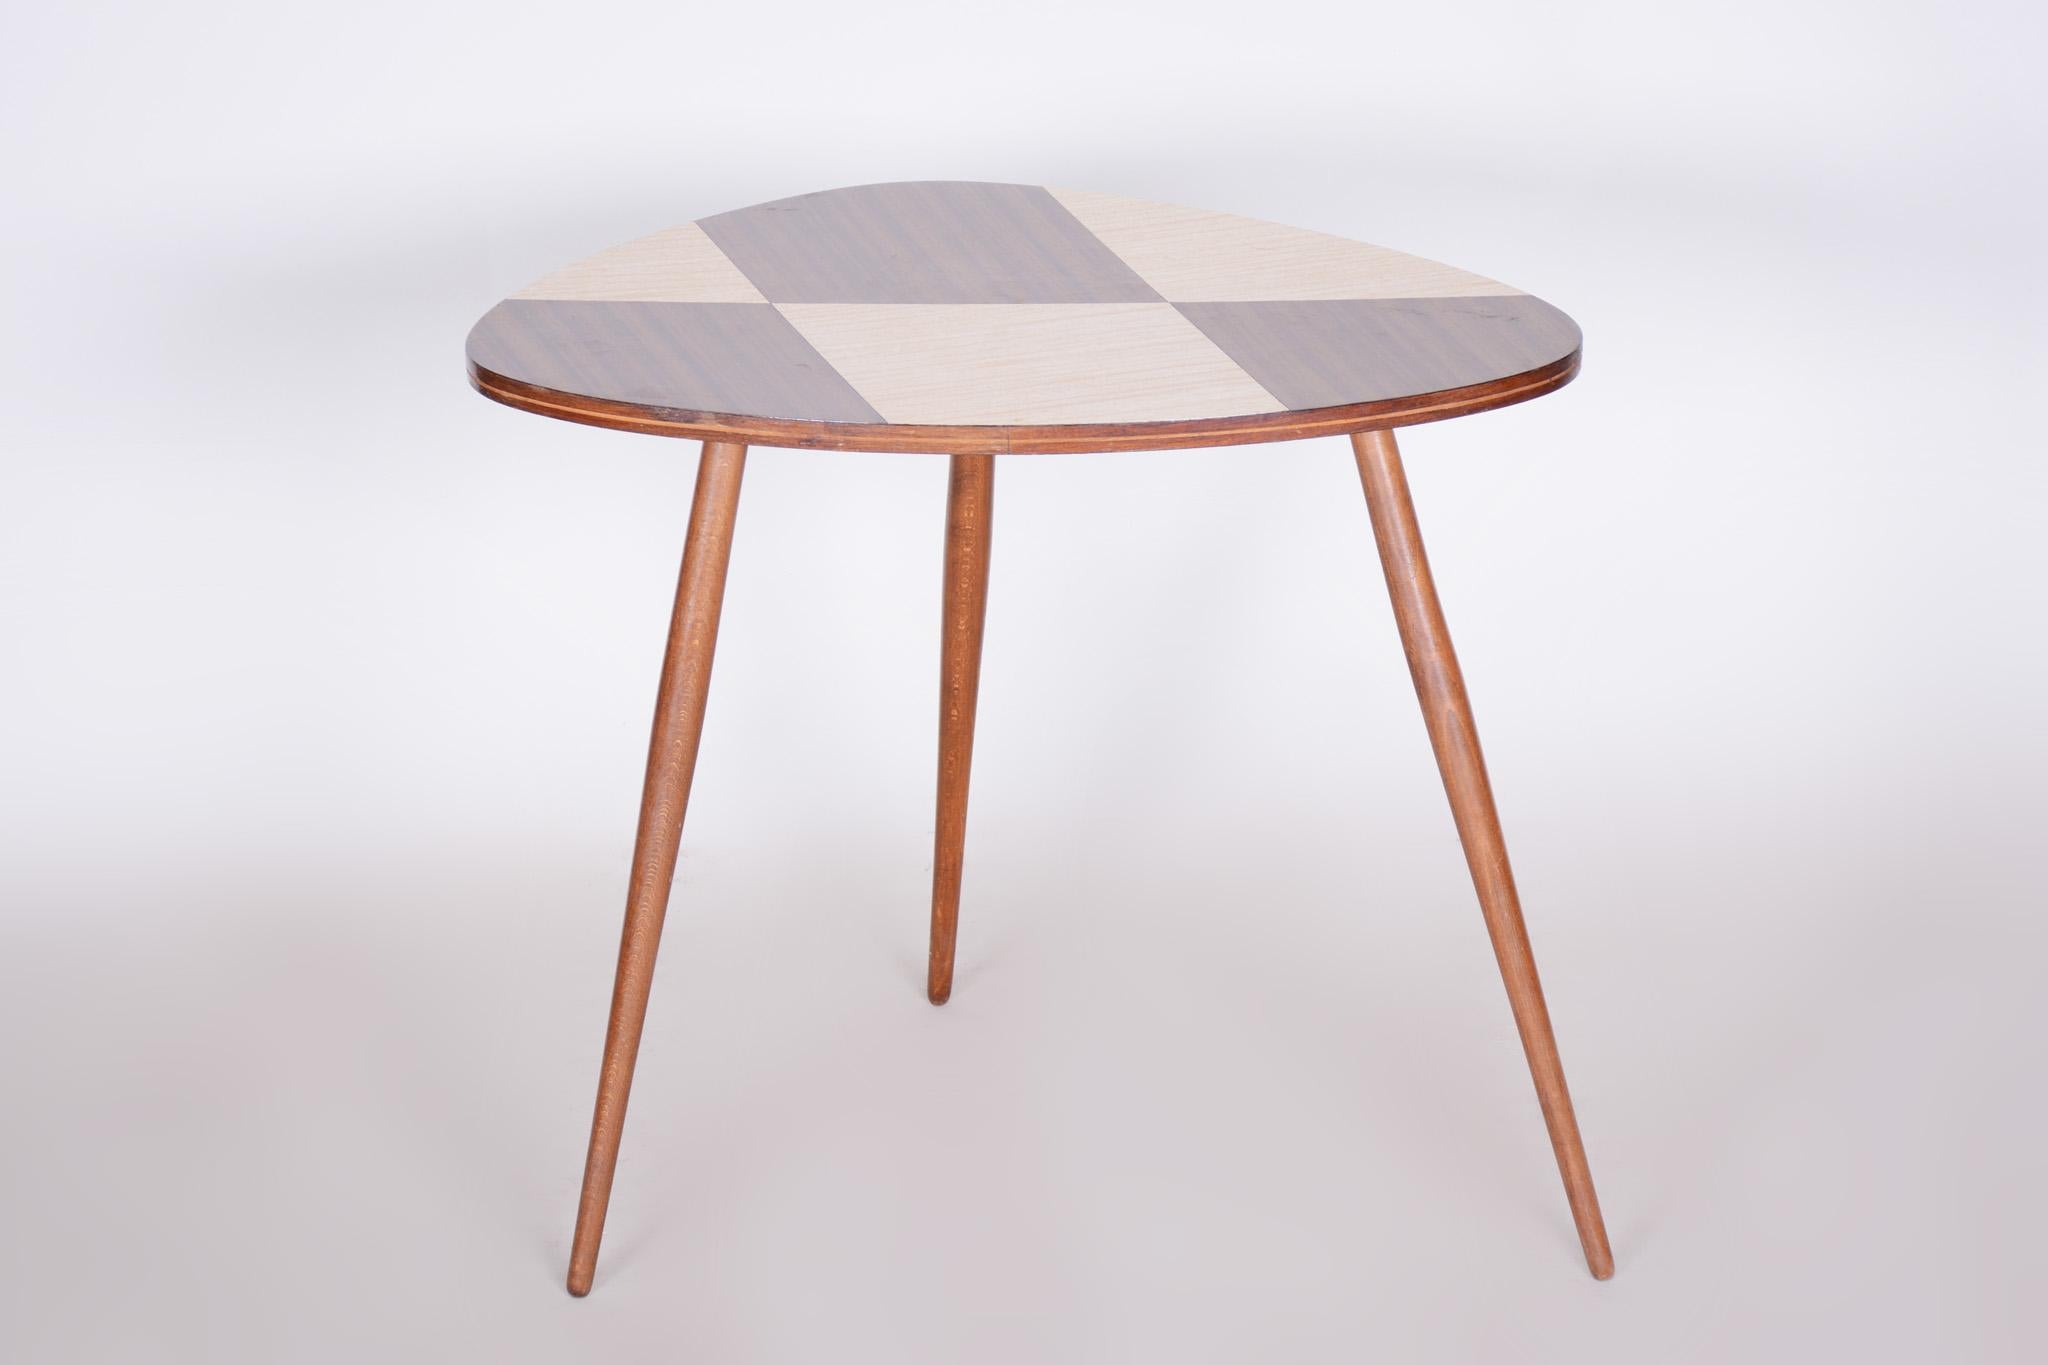 Mid-Century Modern Small Mid Century Table, Made in Czechia, 1950s, Original Condition. Beech For Sale